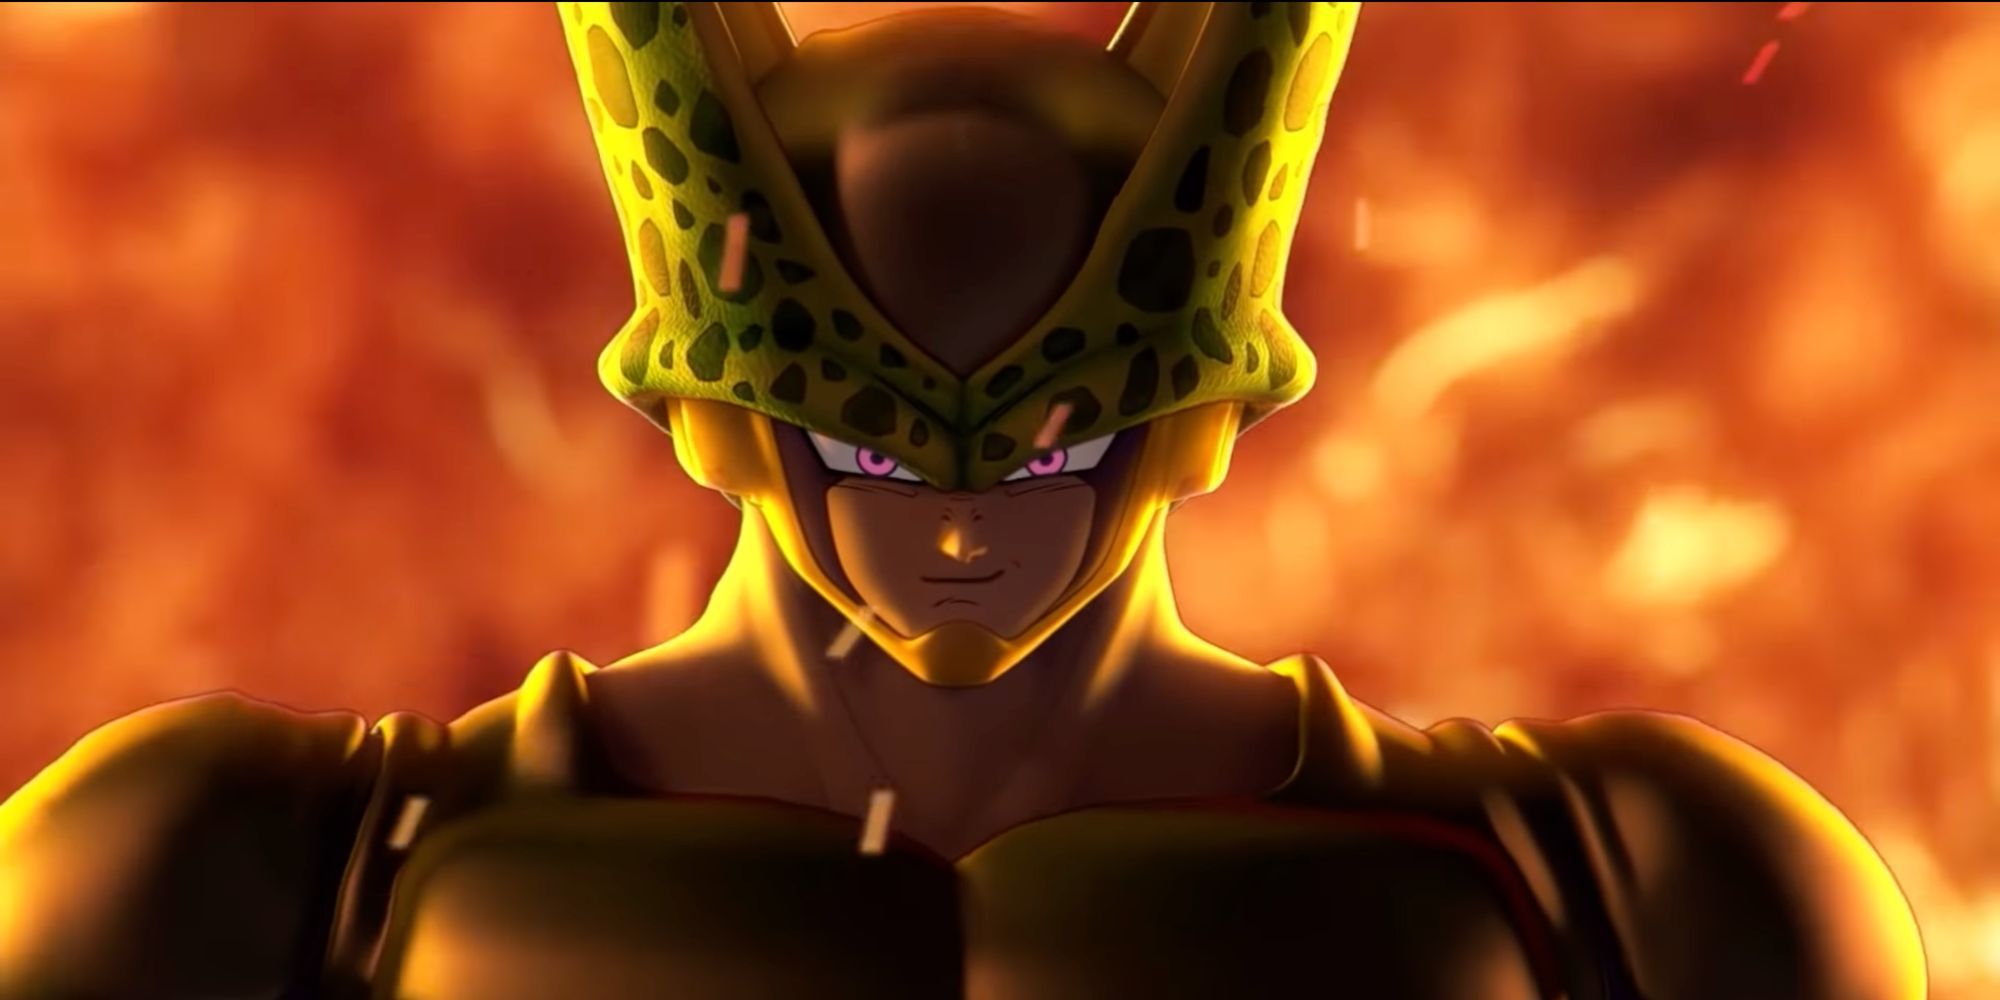 Dragon Ball: The Breakers - Frieza Joins the Raider Lineup - Xbox Wire